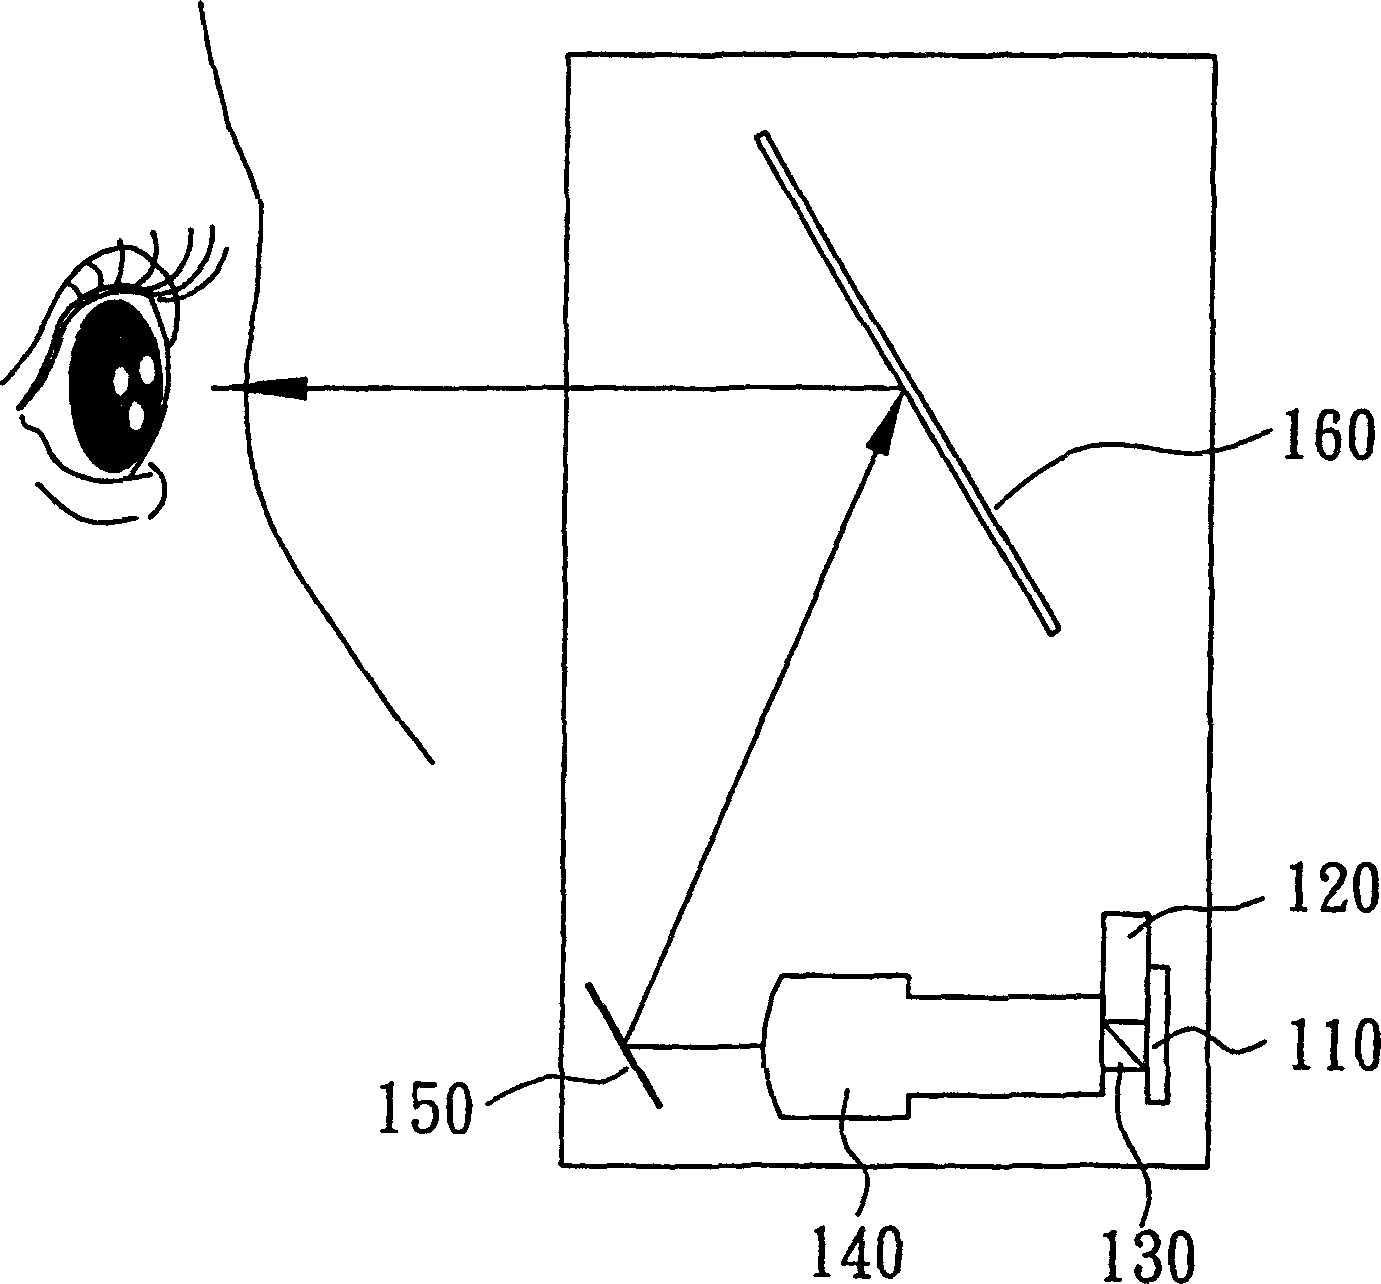 Monoblock refraction imaging display device with visual focal length compressing set